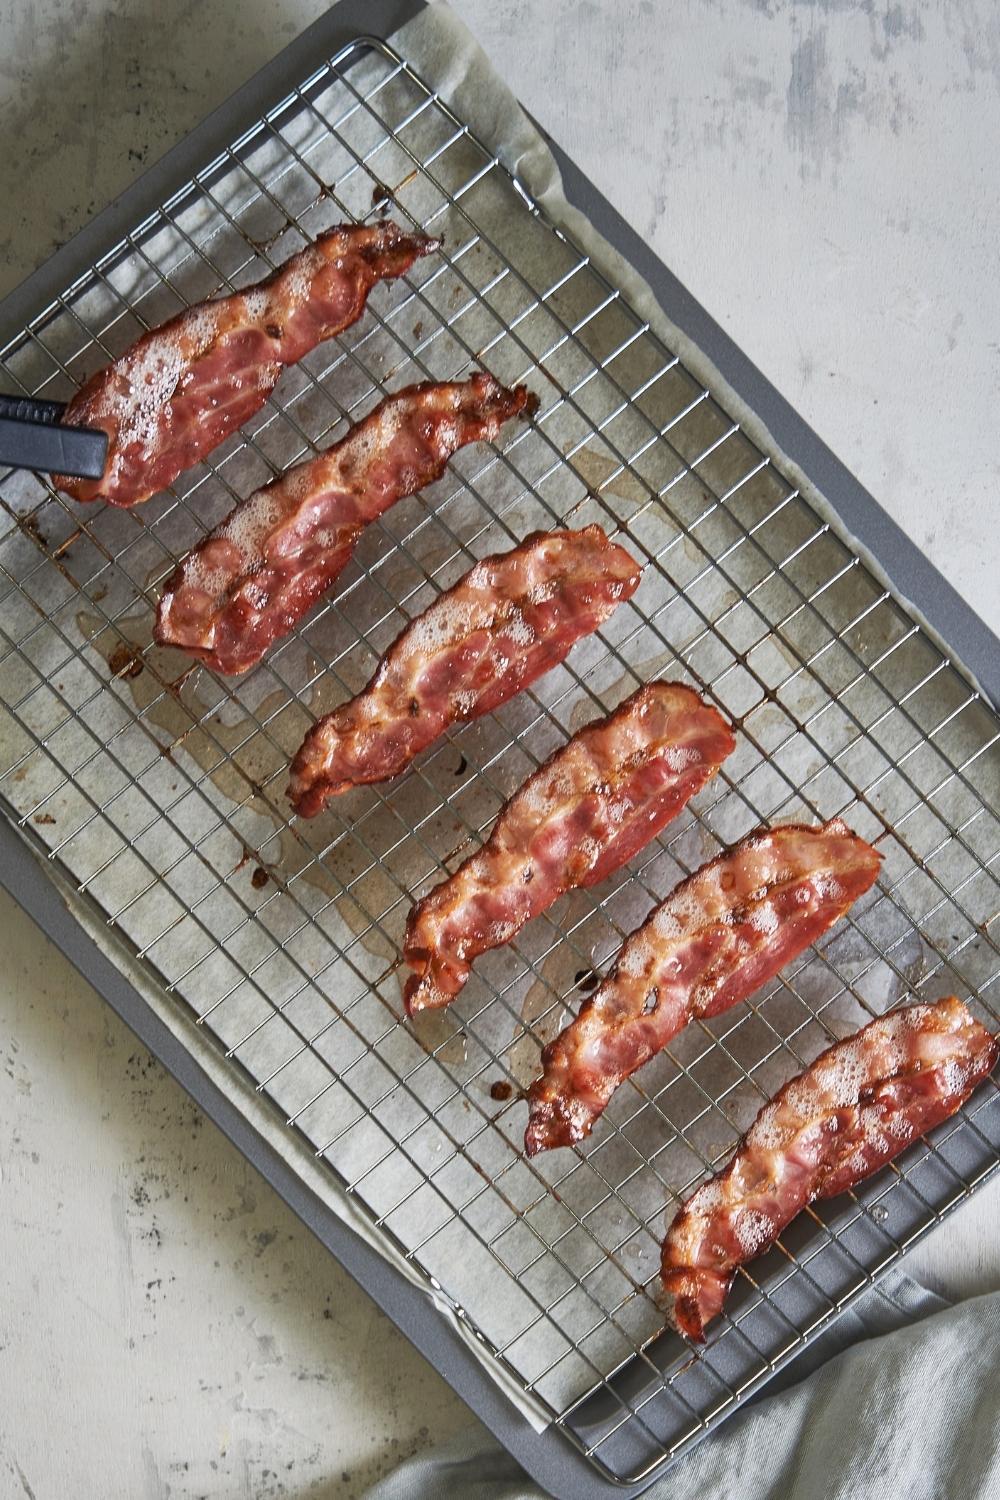 6 pieces of baked turkey bacon slices on a baking rack. A pair of black tongs is flipping the rightmost piece of bacon.